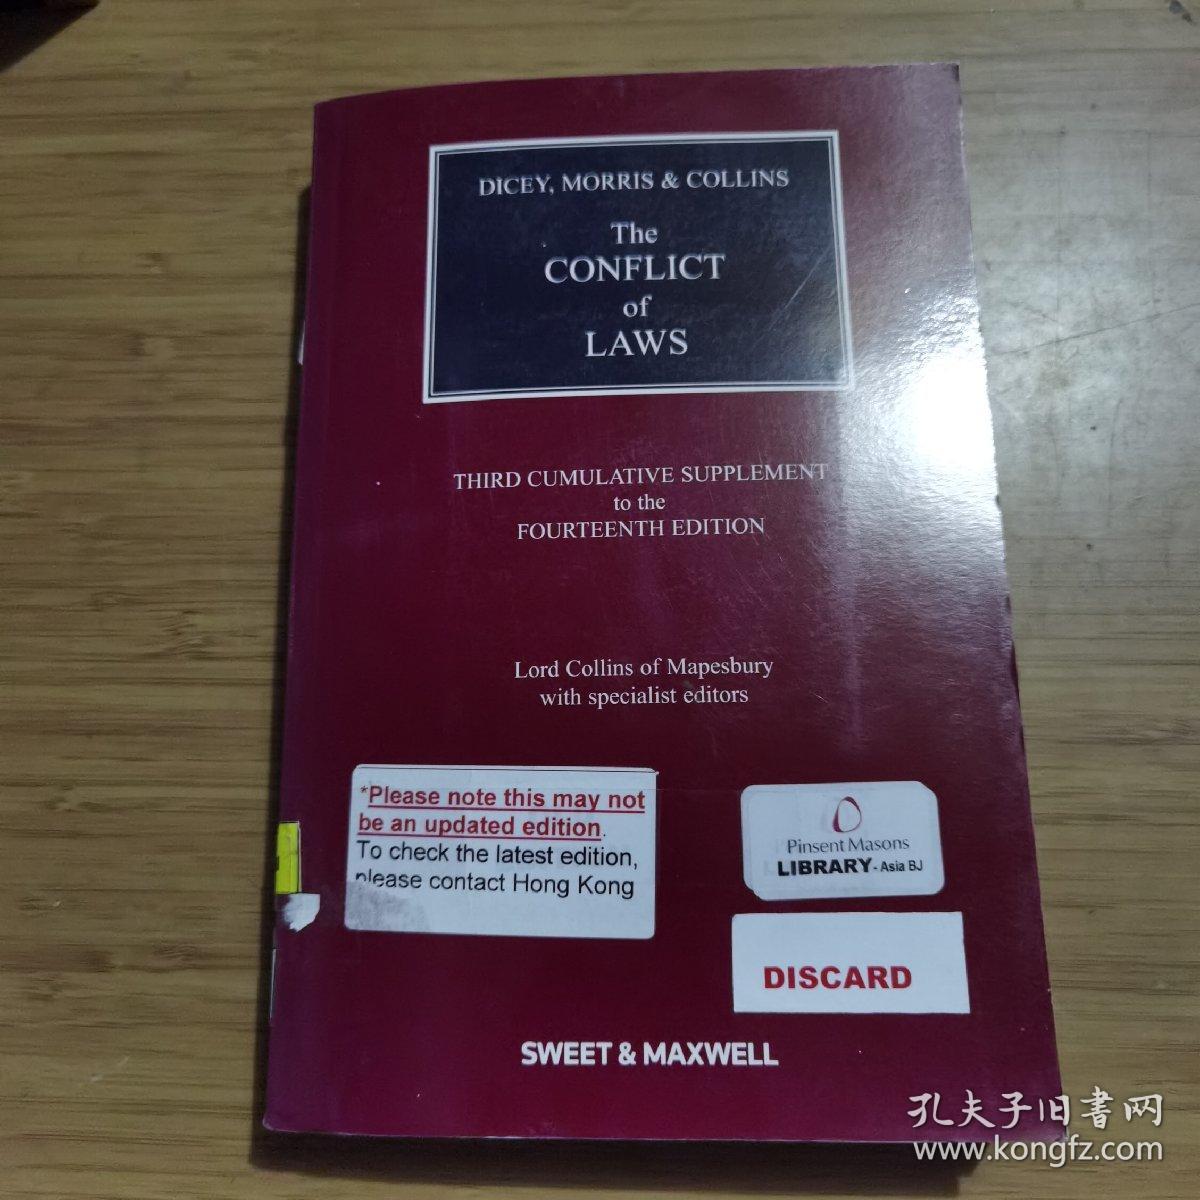 DICEY, MORRIS & COLLINS The CONFLICT of LAWS